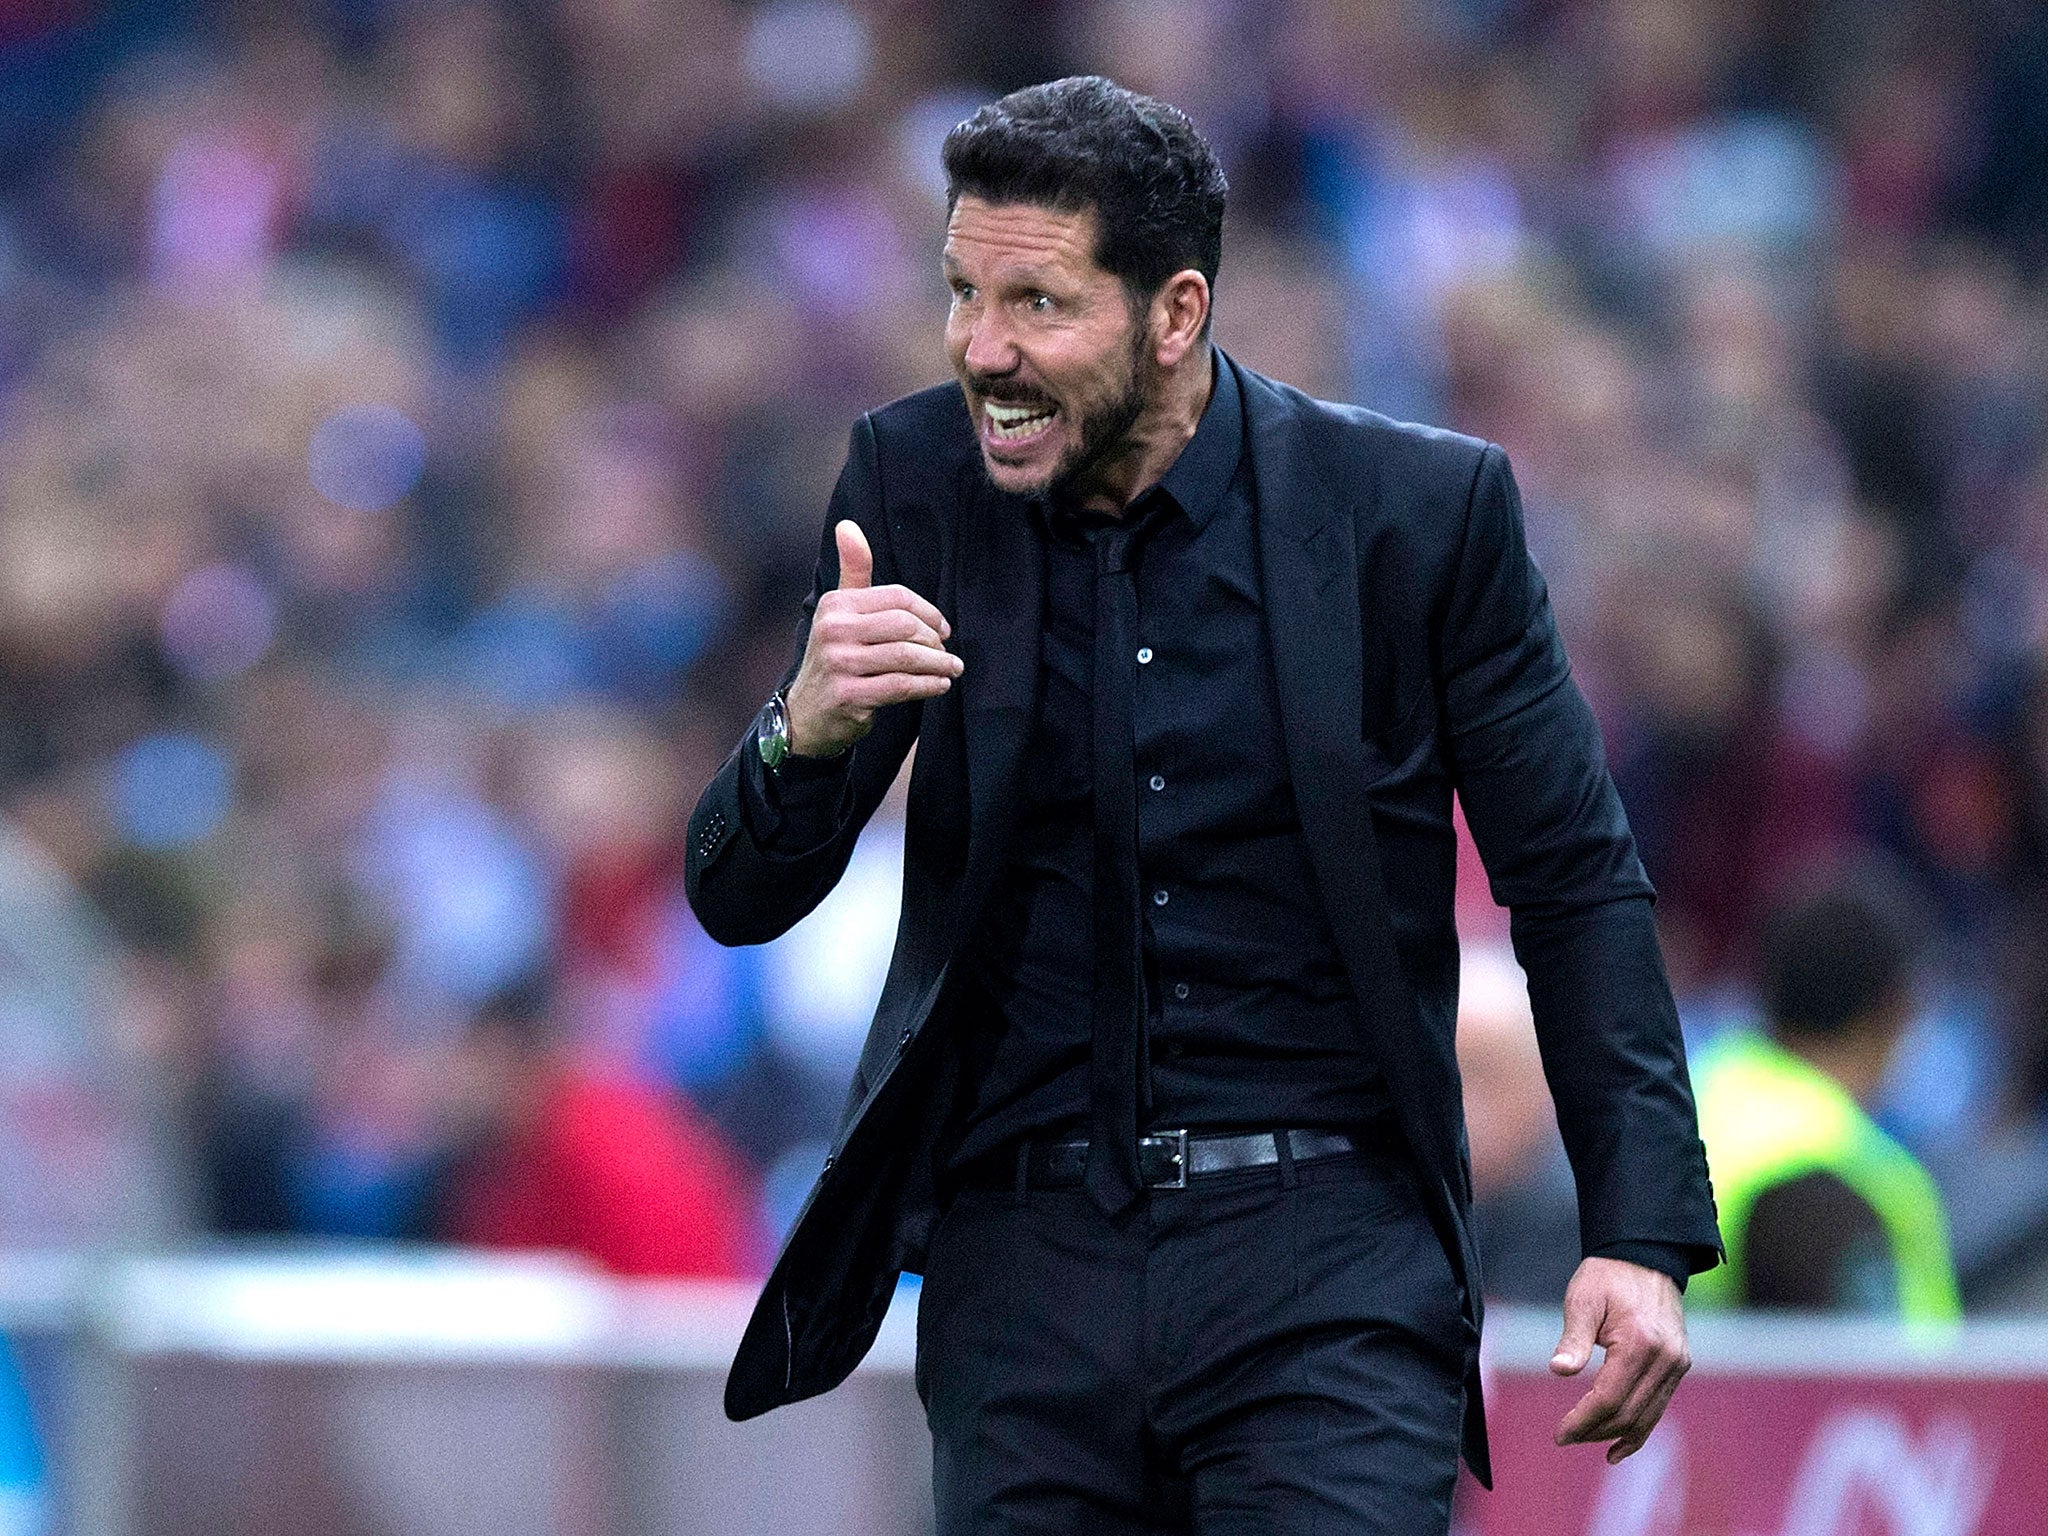 Atletico Madrid head coach Diego Simeone has been linked with a move to Chelsea